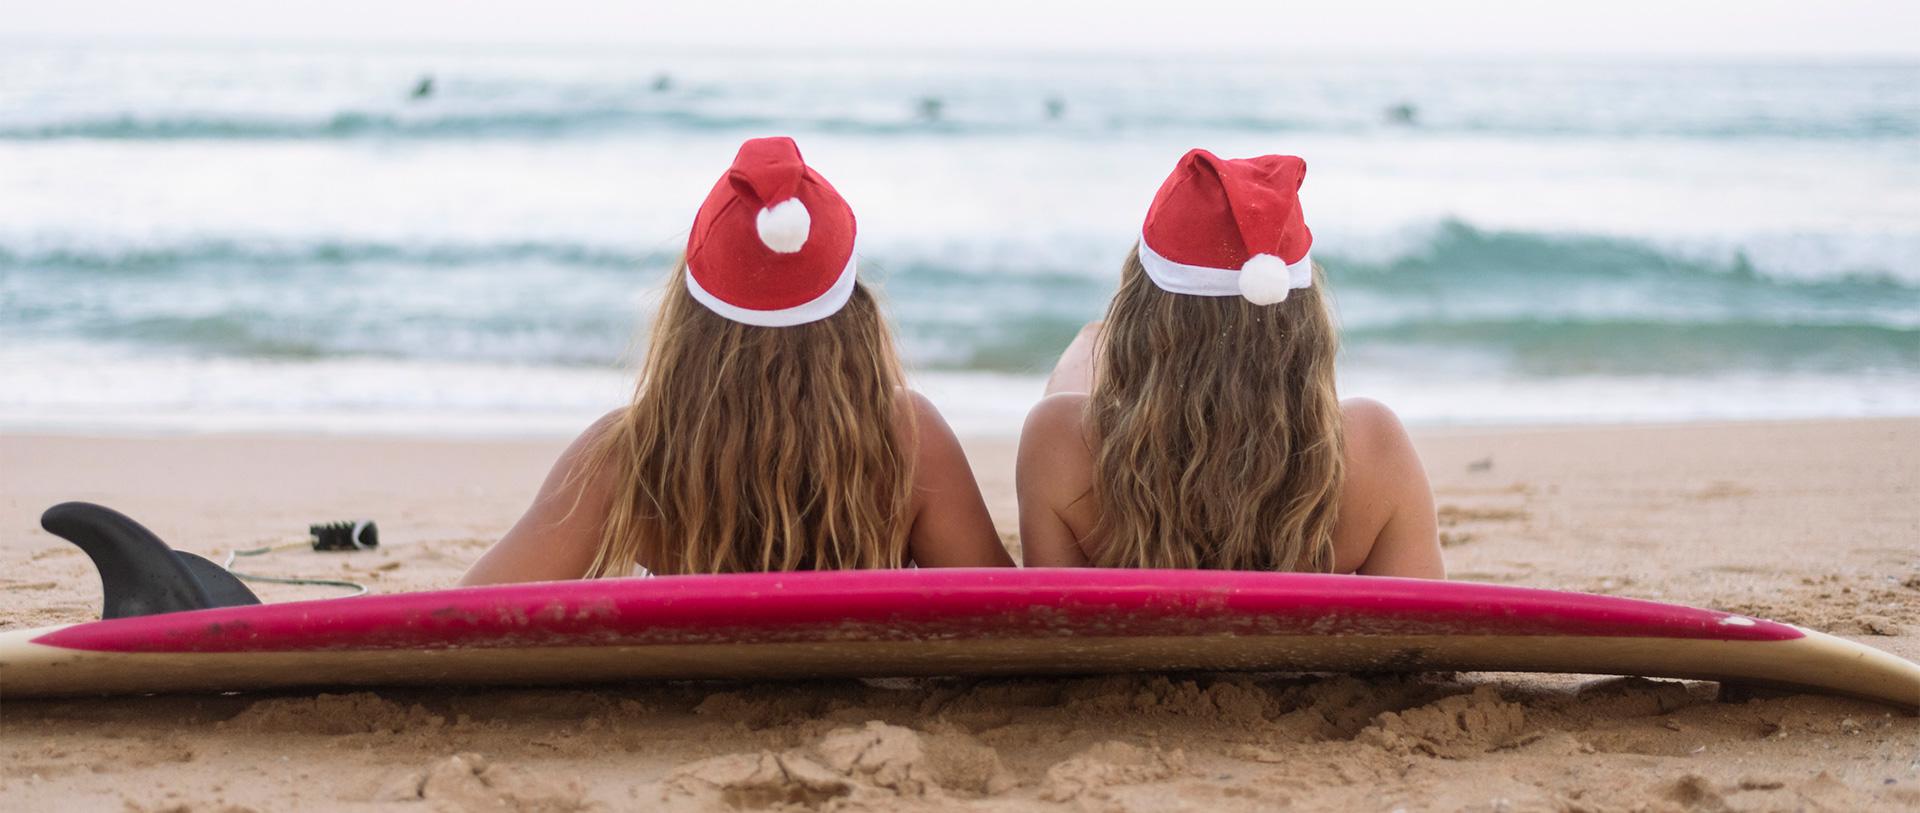 two girls relaxing against a surfboard while wearing red santa hats